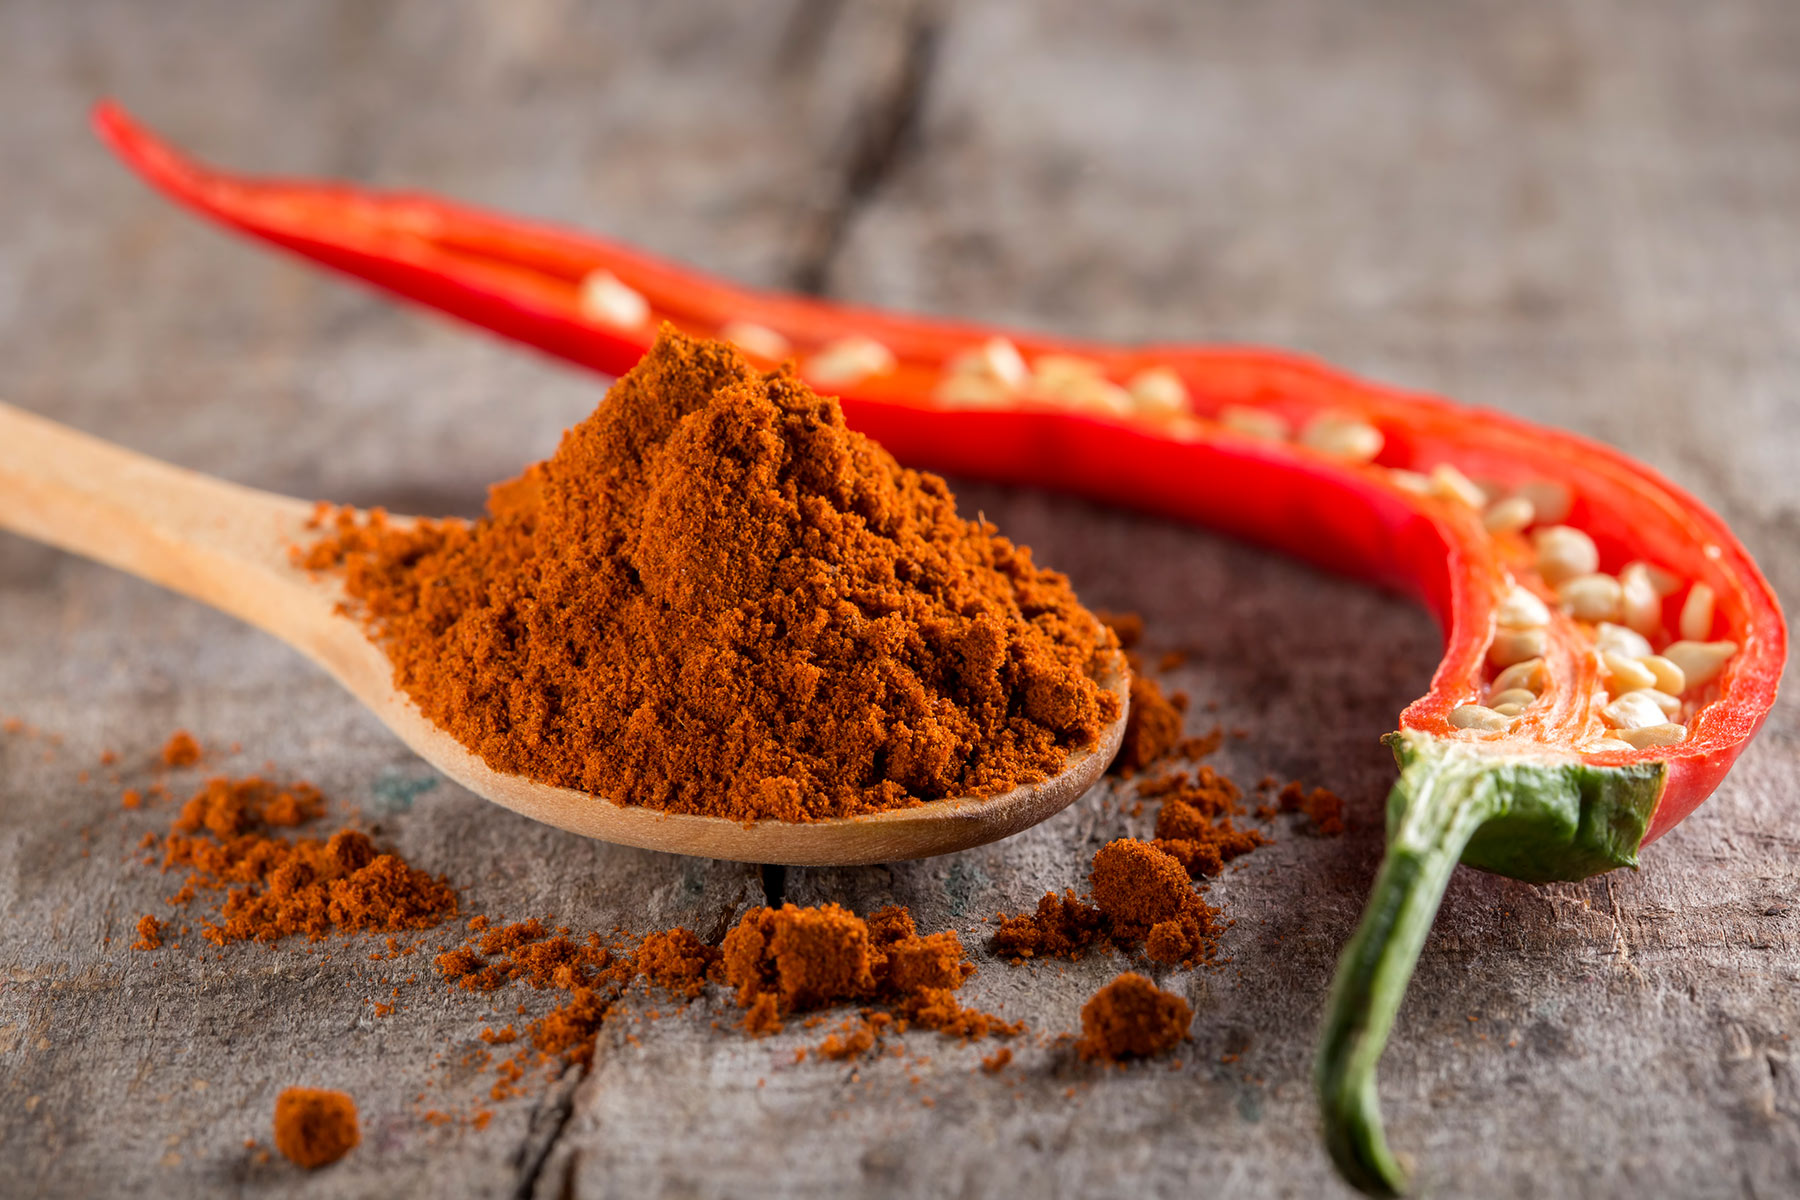  Spicy food helps prevent stomach ulcers